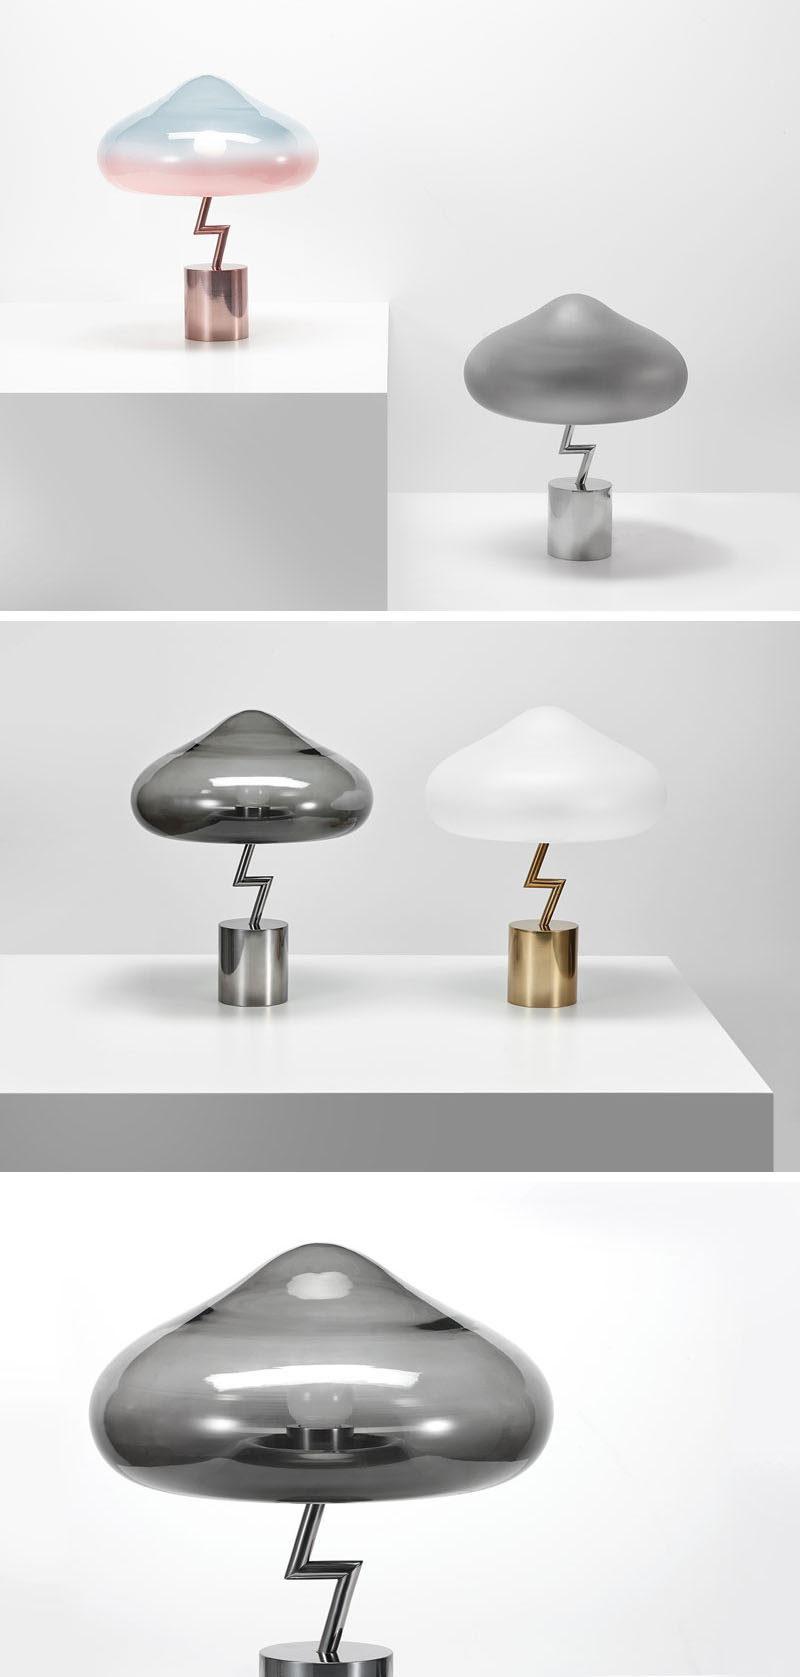 Korean designer Jiyoun Kim has launched his latest design named the Lightning Lamp, a collection of modern table lamps that has a glass cloud with a stainless steel lightning bolt. #ModernLighting #Design #TableLamp #Lighting